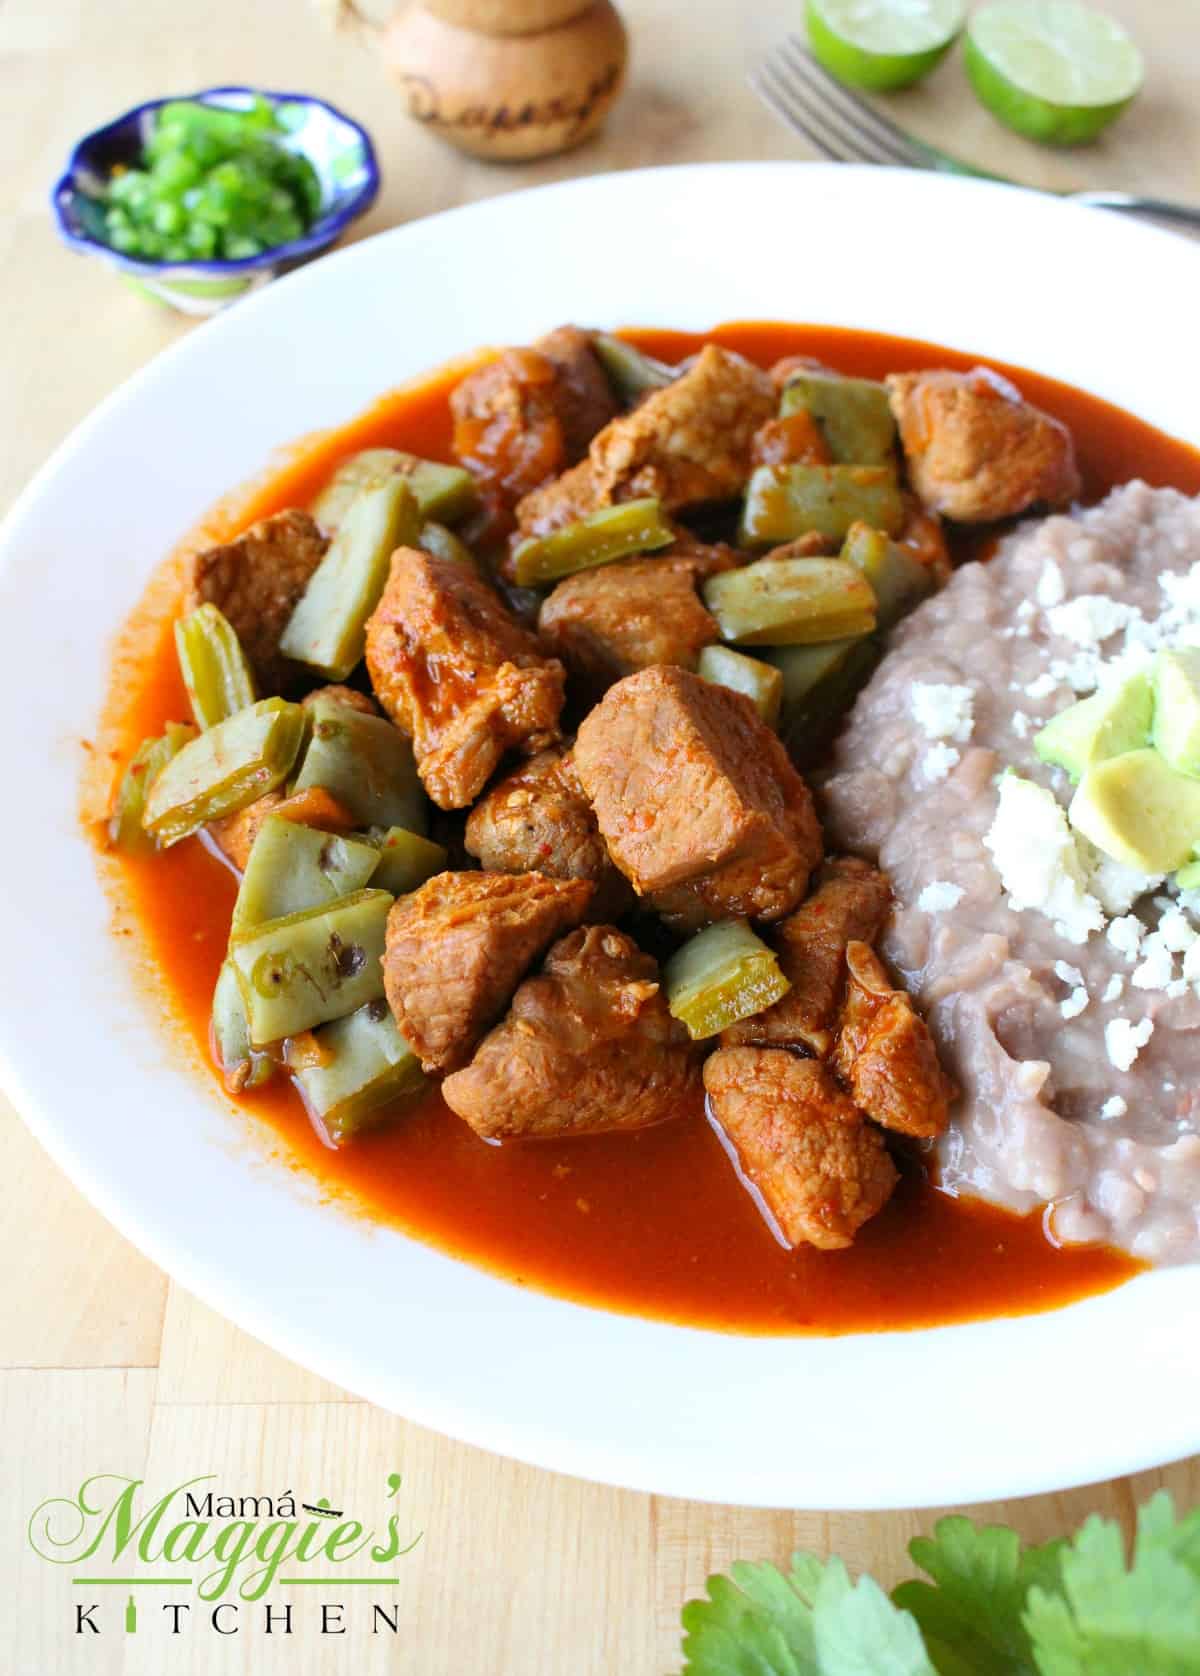 Pork chile colorado with nopales served next to refried beans on a white plate.